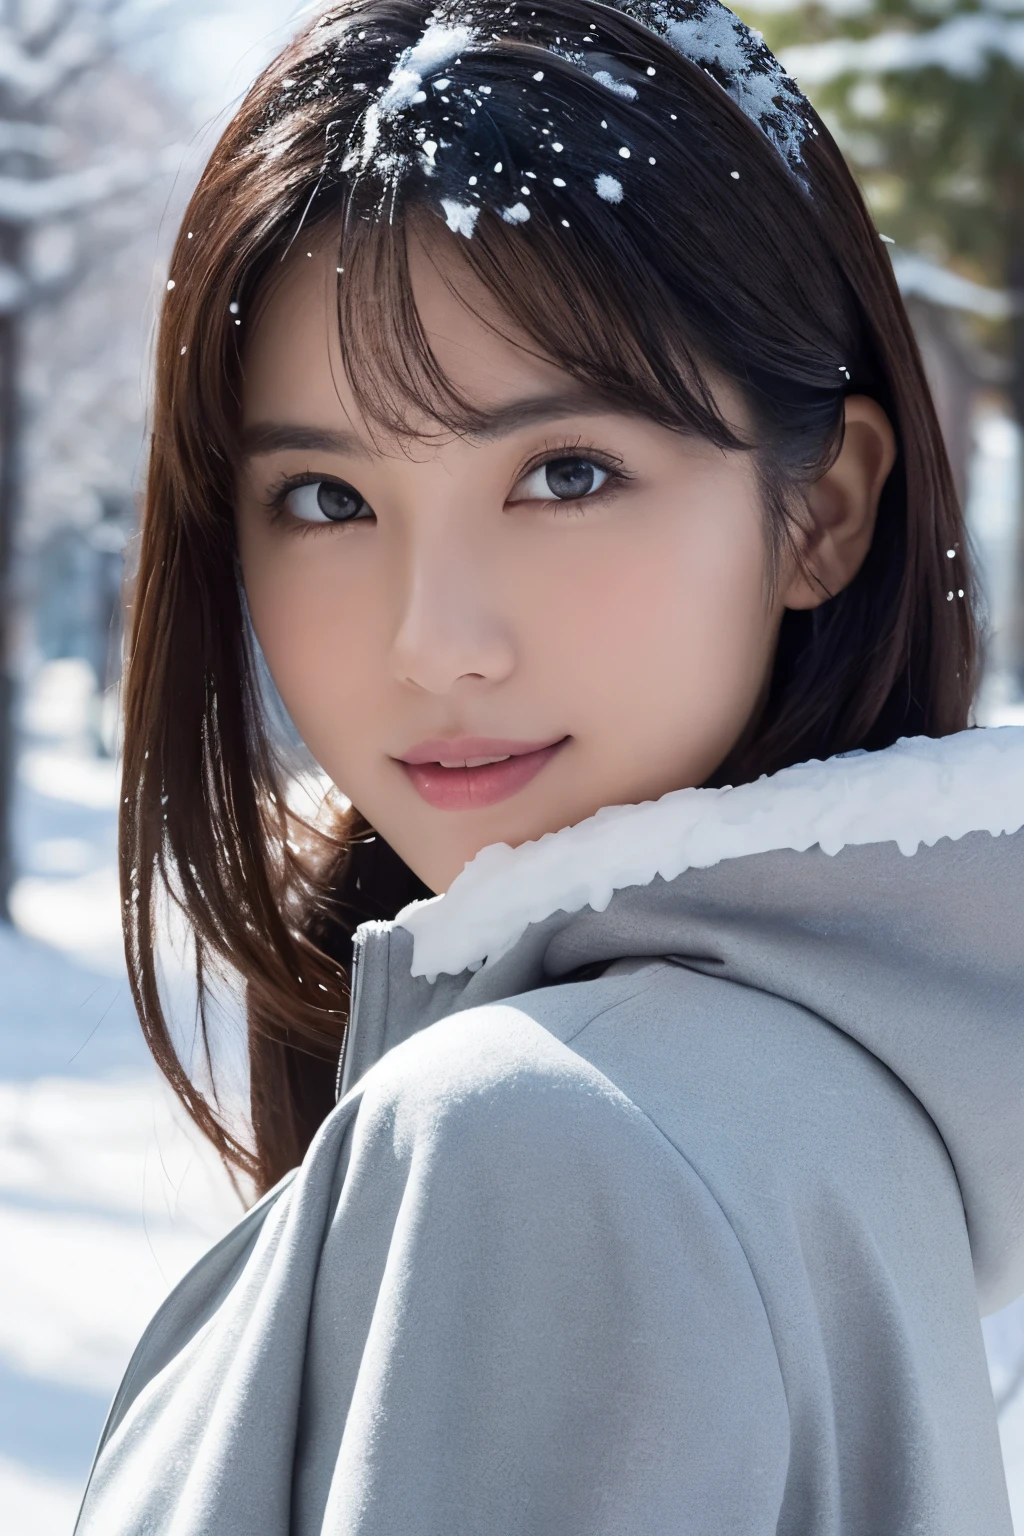 1girl in, (wear a platinum coat:1.2), (Raw photo, Best Quality), (Realistic, Photorealsitic:1.4), masutepiece, Extremely delicate and beautiful, Extremely detailed, 2k wallpaper, amazing, finely detail, the Extremely Detailed CG Unity 8K Wallpapers, Ultra-detailed, hight resolution, Soft light, Beautiful detailed girl, extremely detailed eye and face, beautiful detailed nose, Beautiful detailed eyes, Cinematic lighting, Illuminations coloring the city on a snowy night, (Illumination of street trees covered with snow like frost-covered trees:1.4), Snowy landscape, It's snowing, There&#39;There&#39;There&#39;There&#39;There&#39;There&#39;There&#39;s snow in my hair, Perfect Anatomy, Slender body, Taut, 
Straight semi-long hair, Bangs, Looking at Viewer, A slight smil